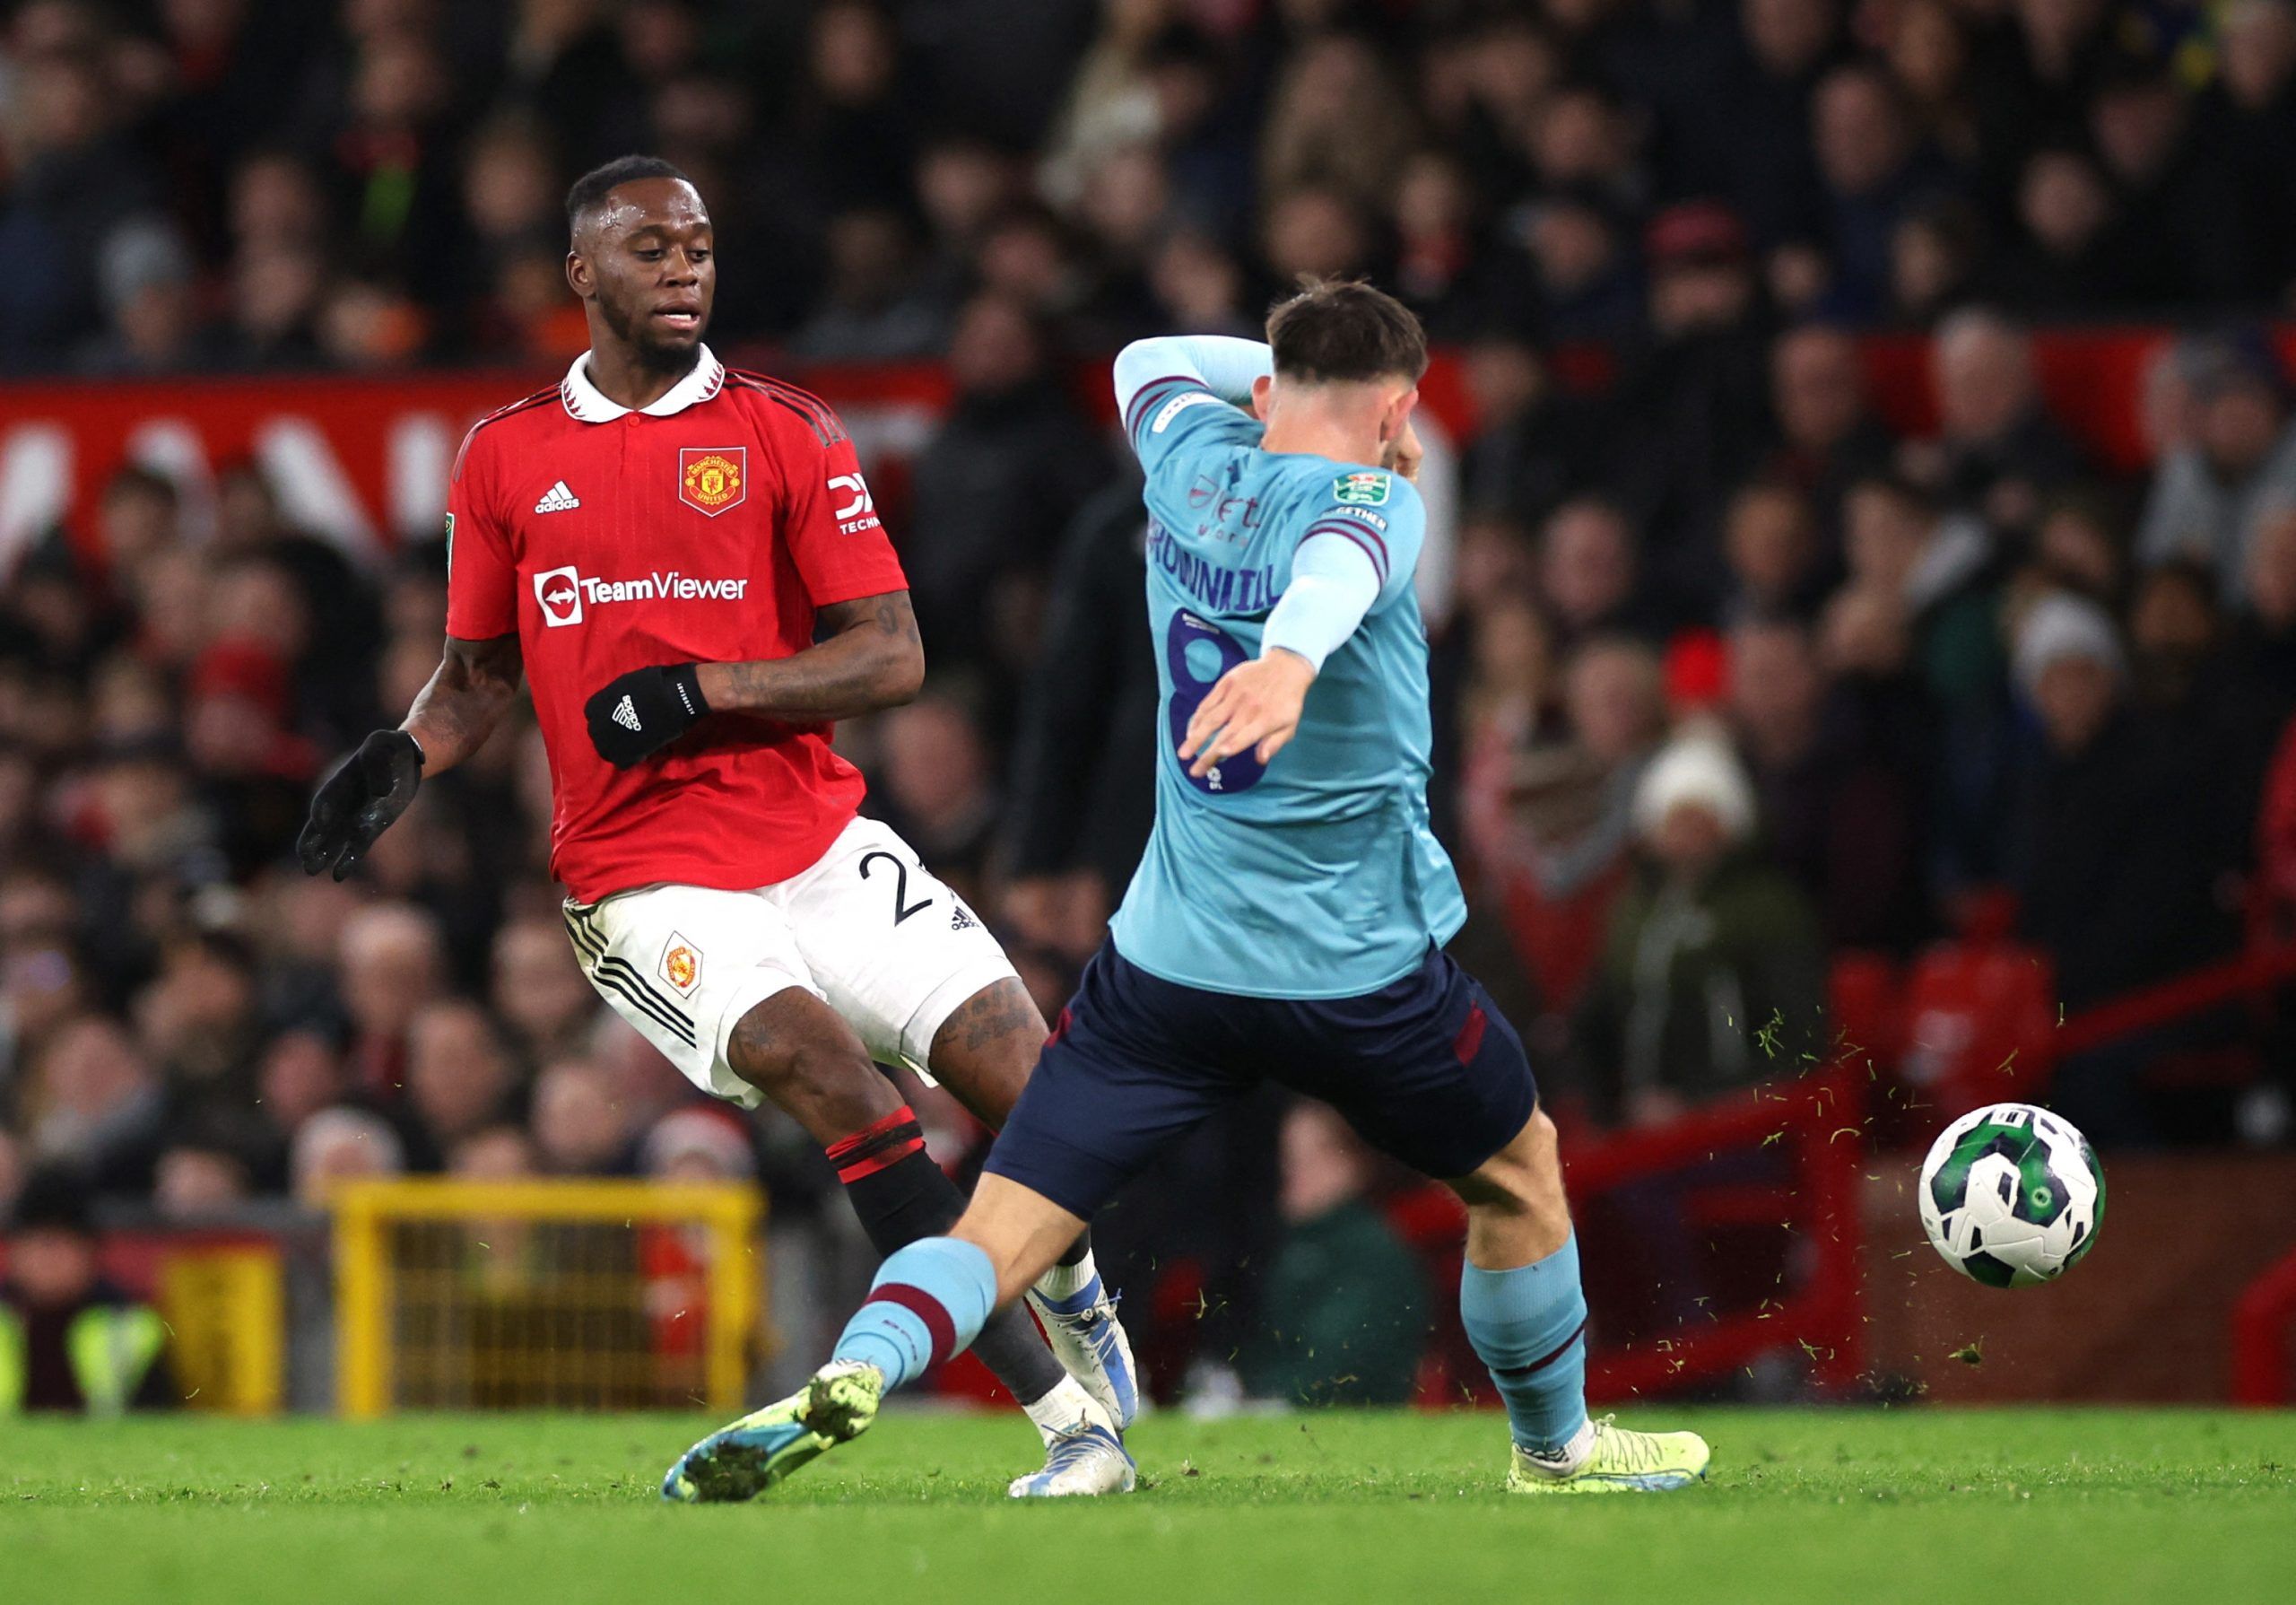 aaron-wan-bissaka-manchester-united-carabao-cup-burnley-performance-in-numbers.jpg